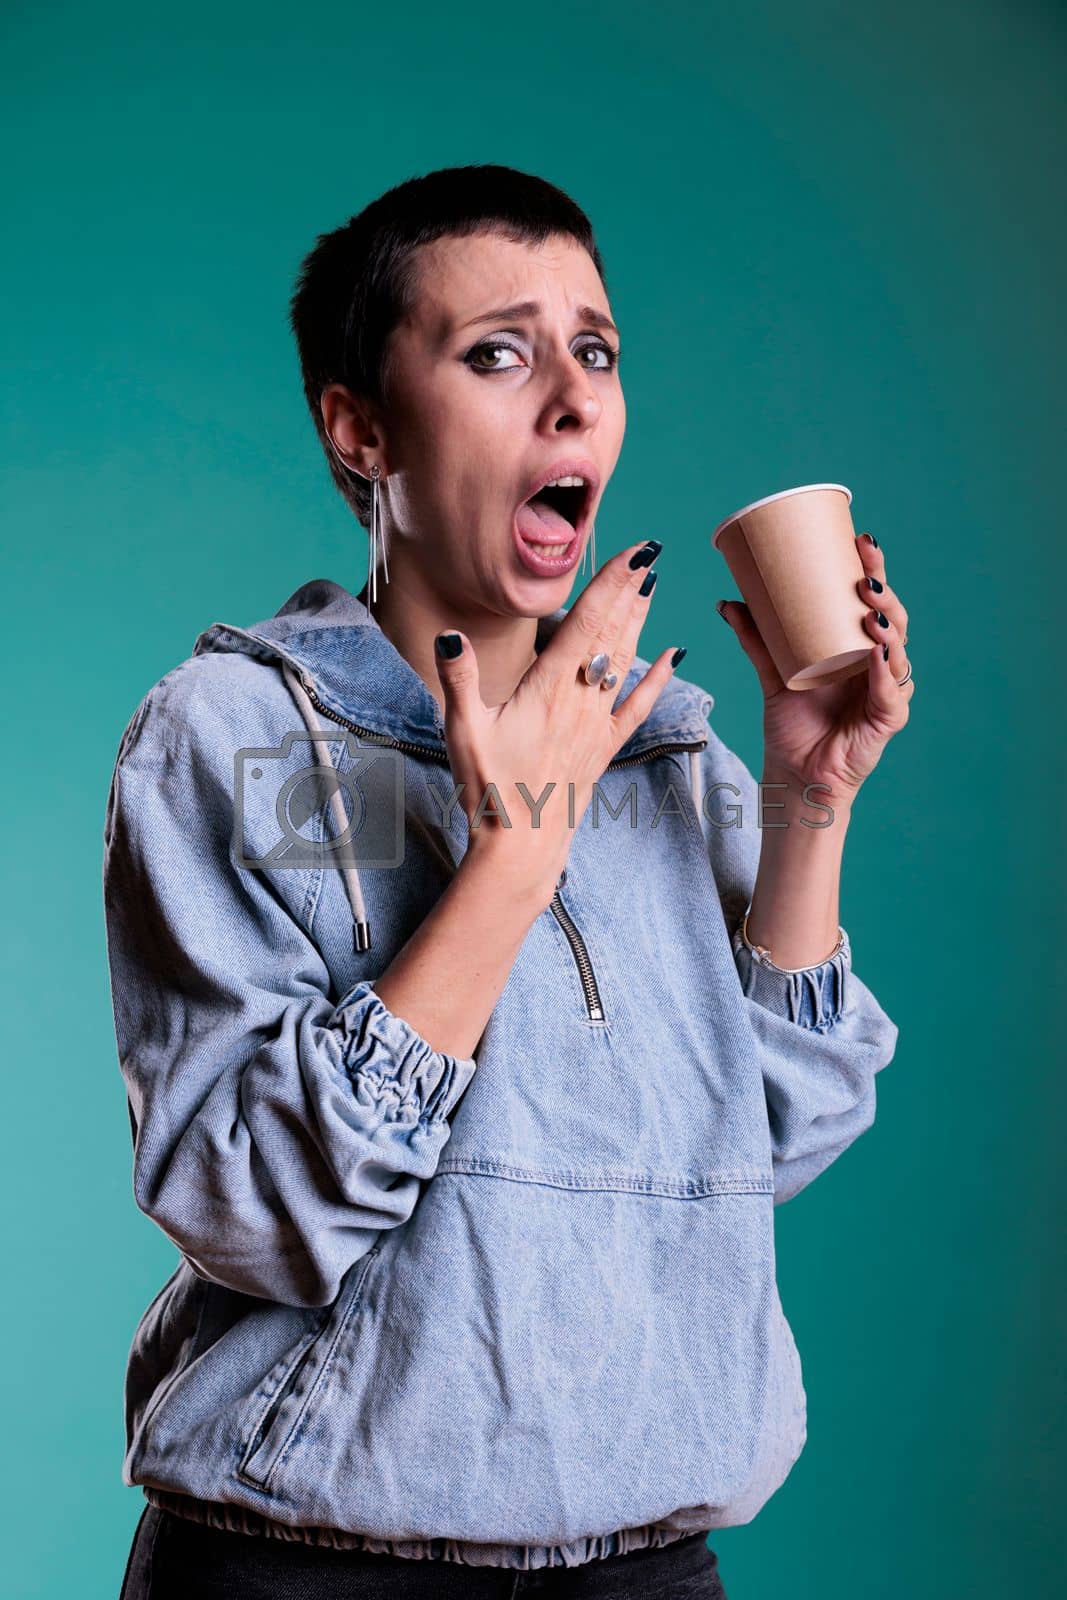 Royalty free image of Woman burned her tongue after tasting too hot coffee during leisure time in studio by DCStudio